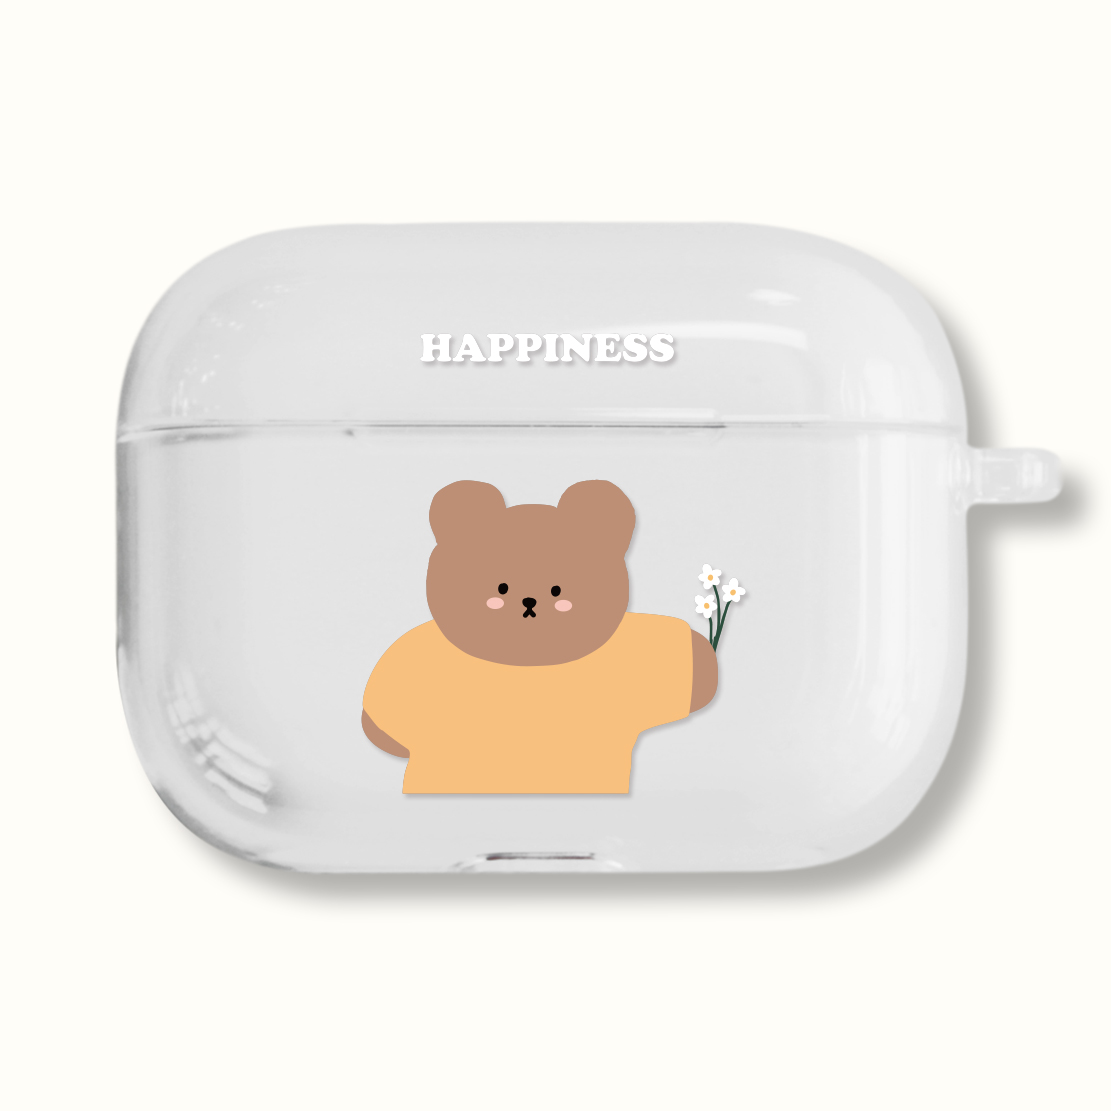 [CLEAR AIRPODS PRO] 485 꽃줄베어